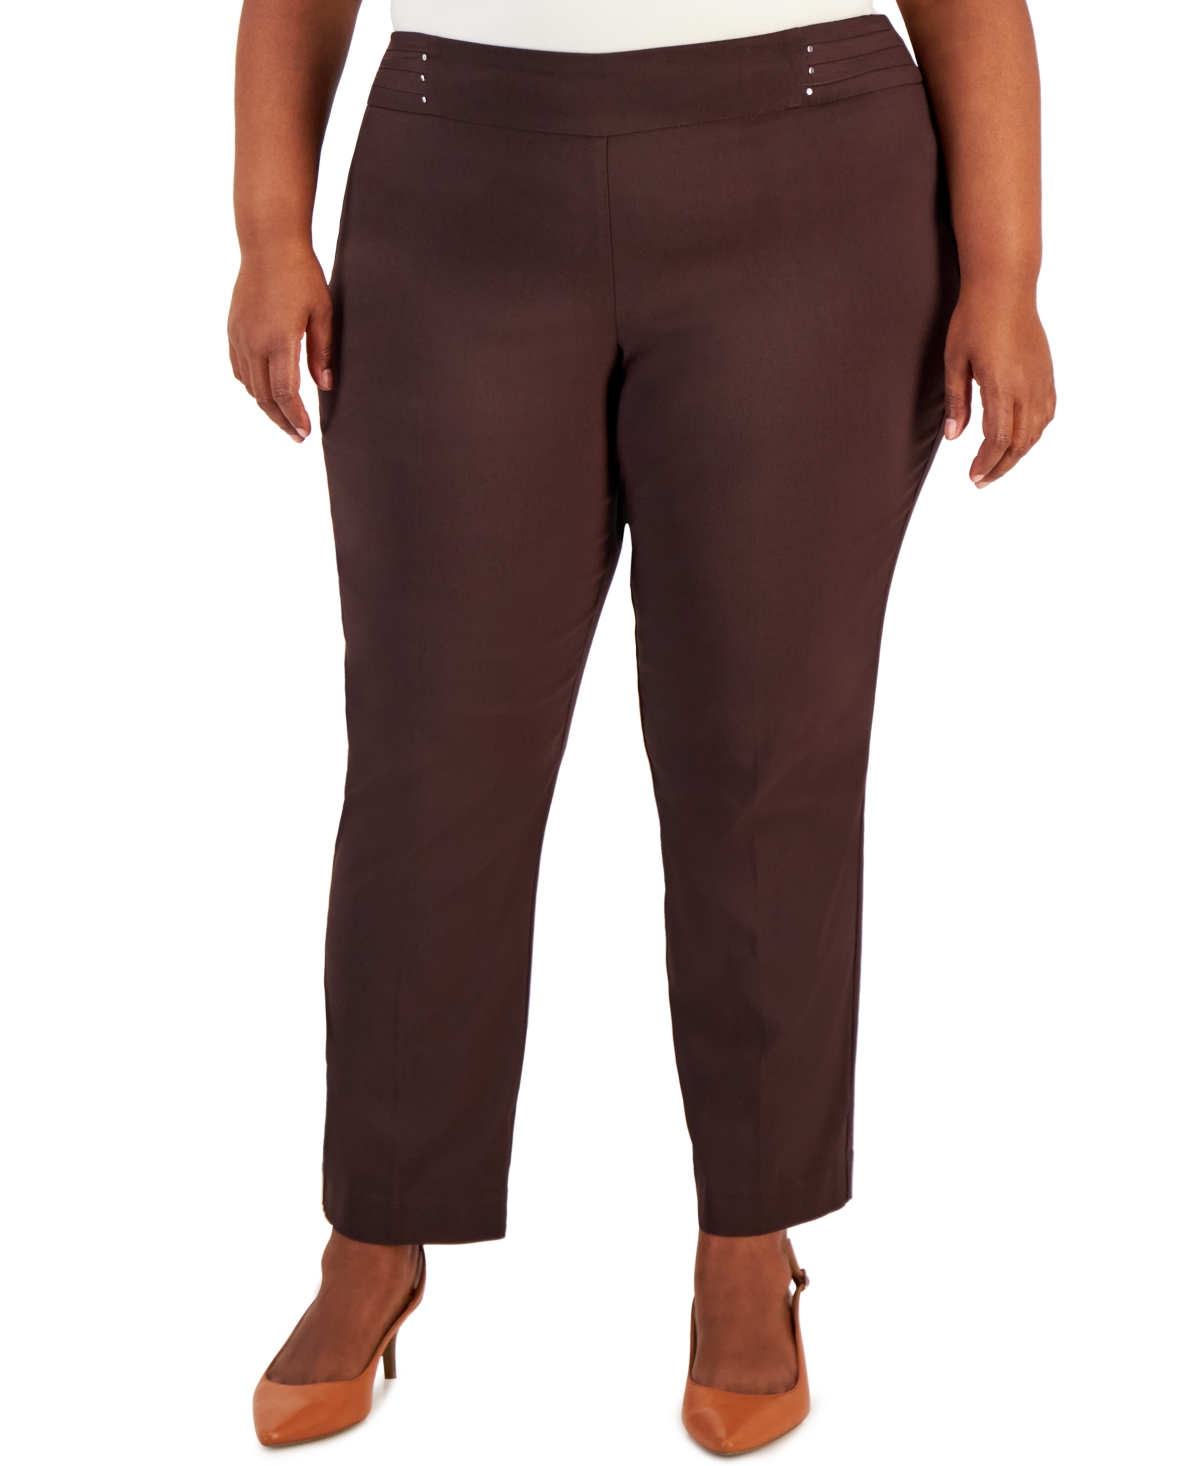 Jm Collection Plus Size Tummy Control Pull-On Slim-Leg Pants, Created for Macy's